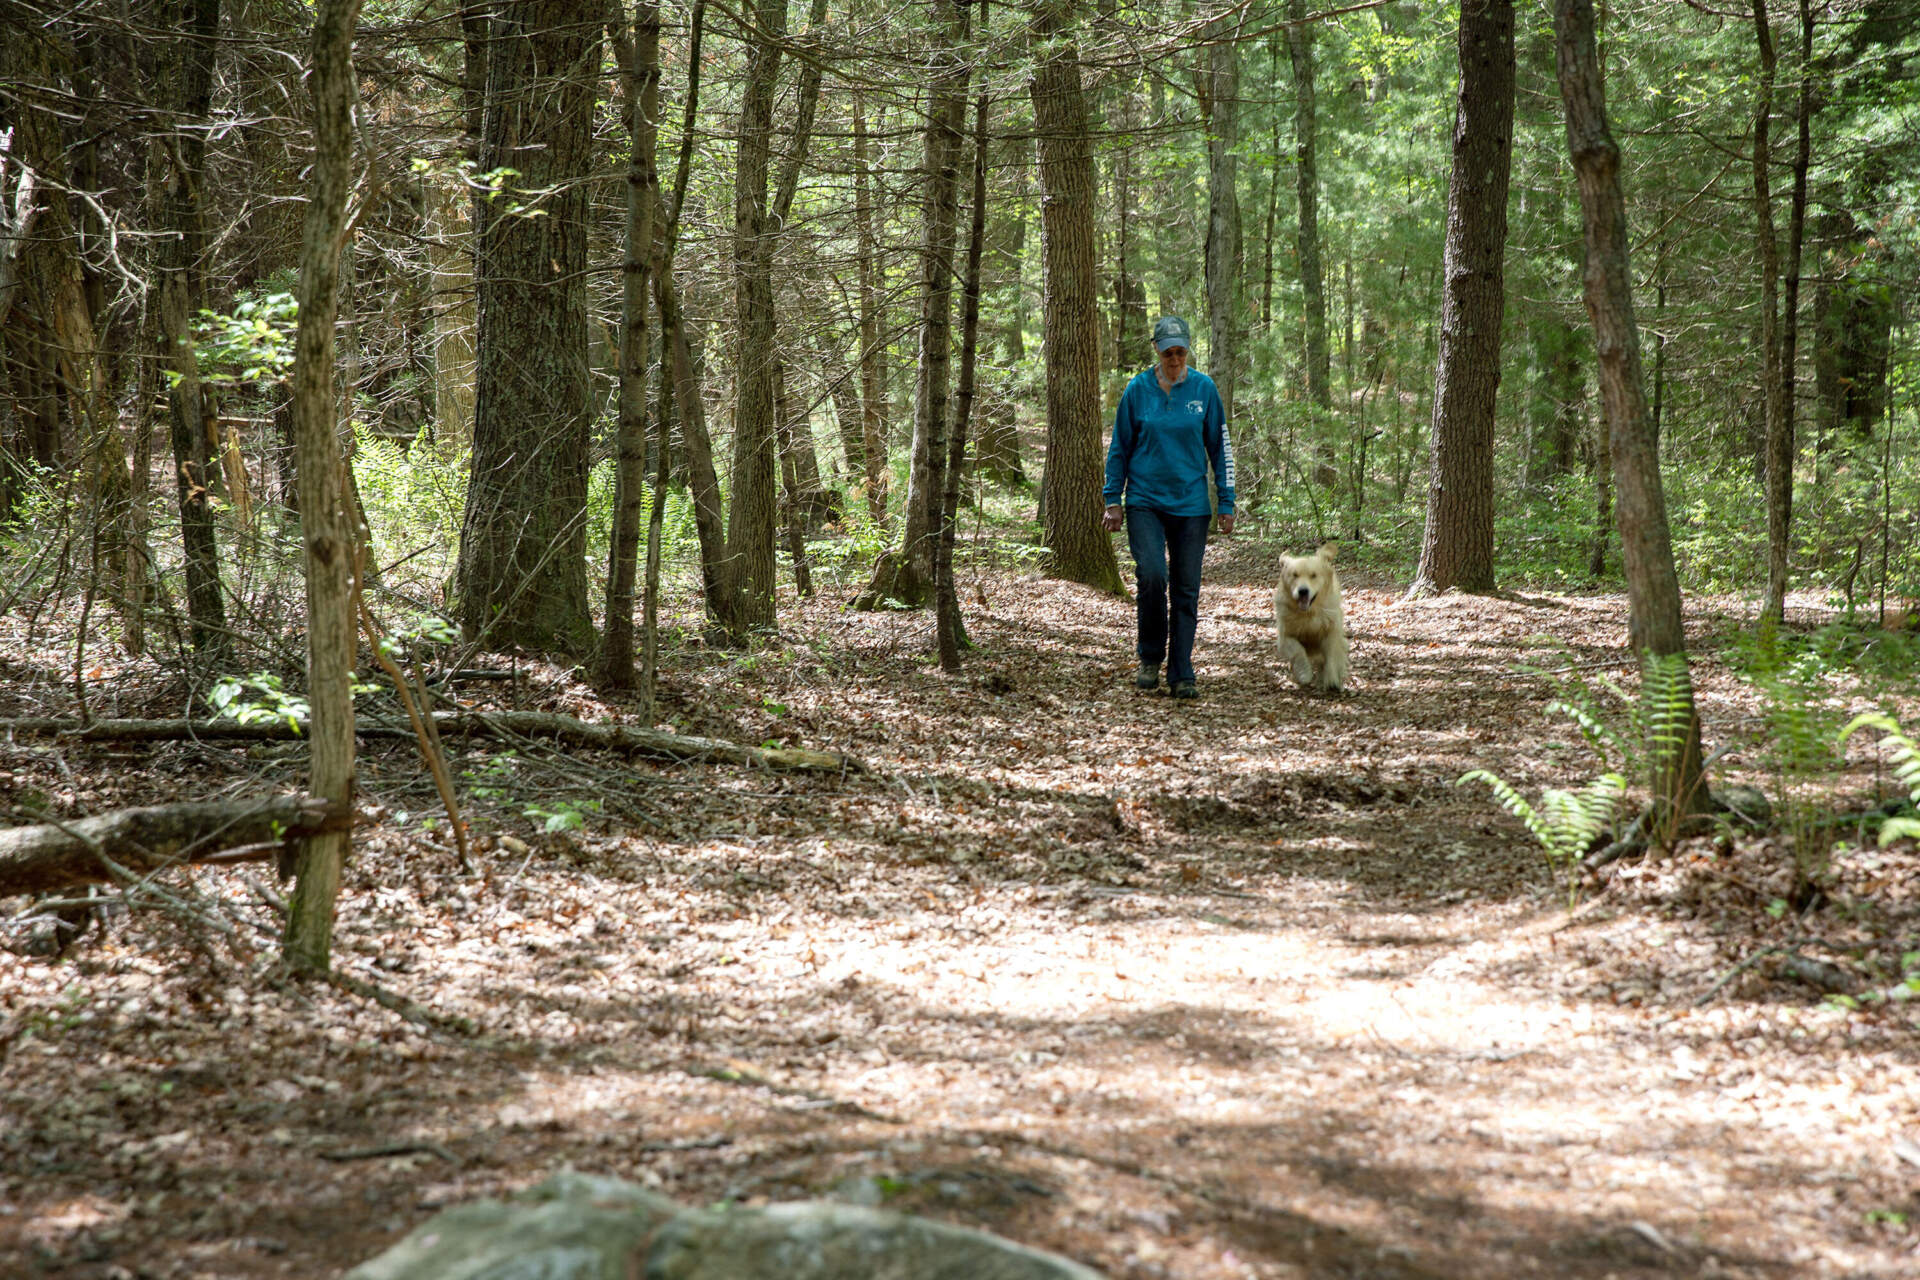 Edith Wislocki walks along a woodland path with her dog Woodruff, in an area of woods she aims to restrict from development as conservation land. (Robin Lubbock/WBUR)